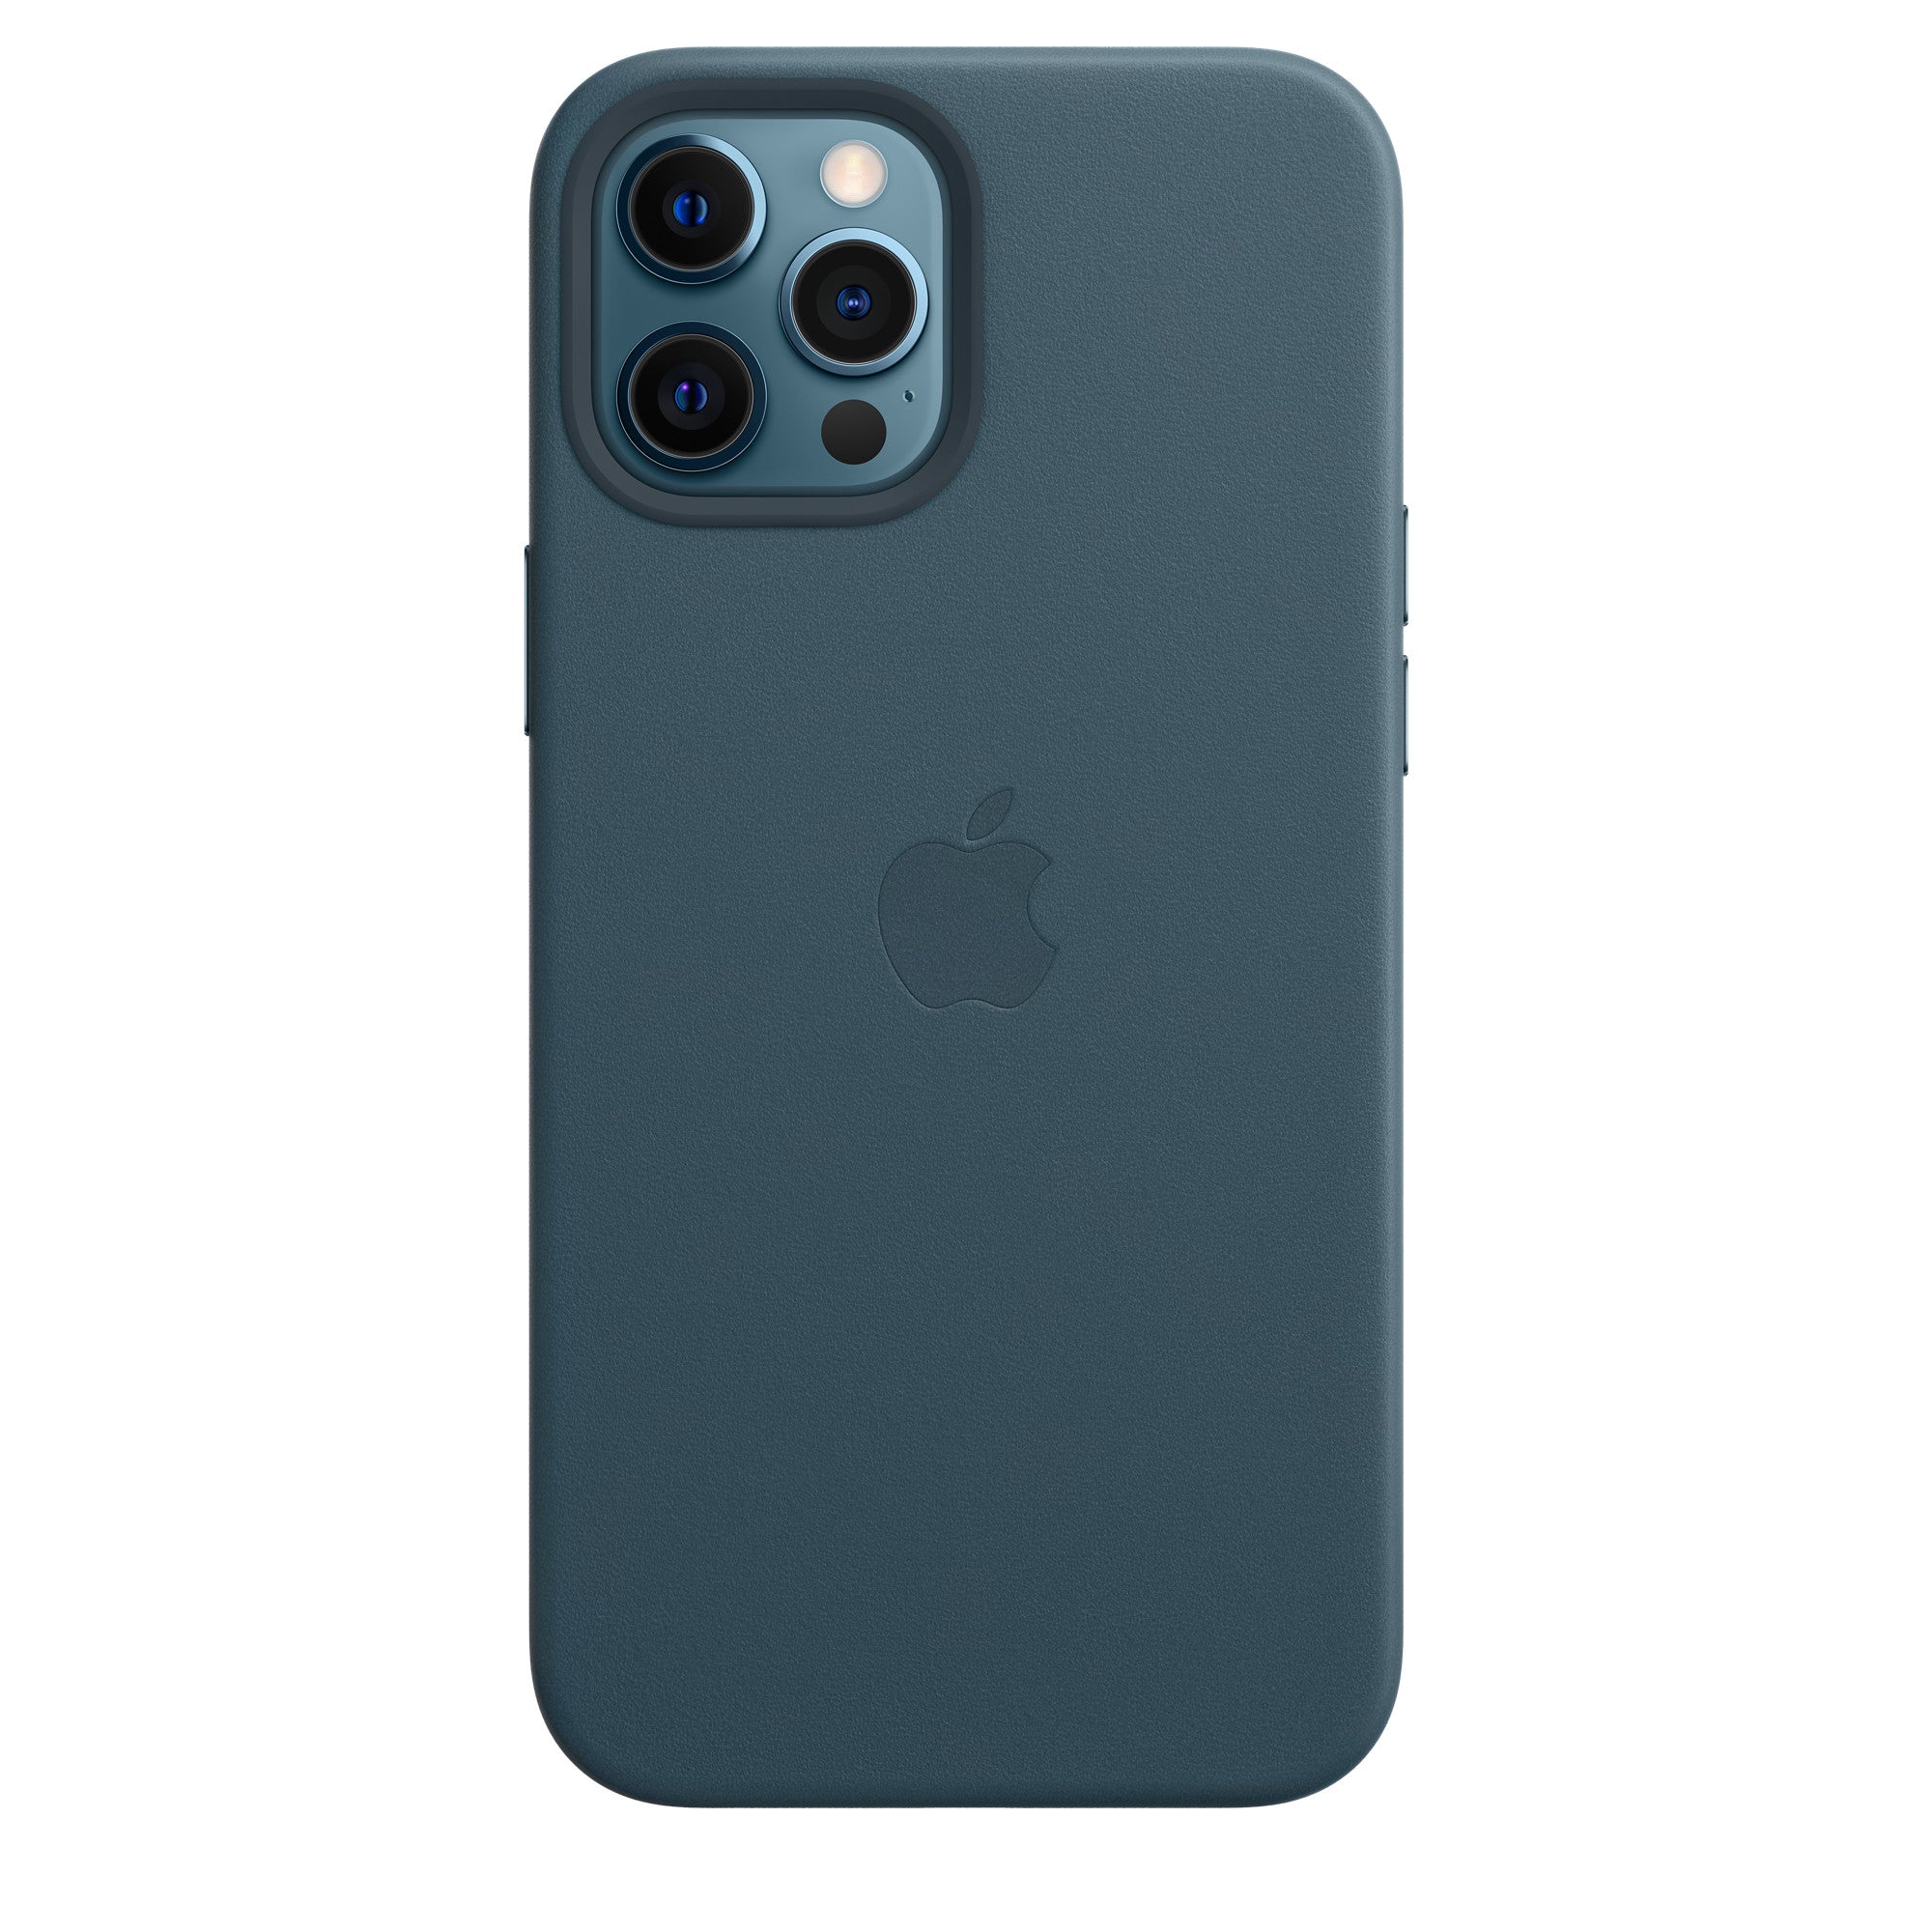 Apple iPhone 12 Pro Max Leather Case - Baltic Blue - Brand New